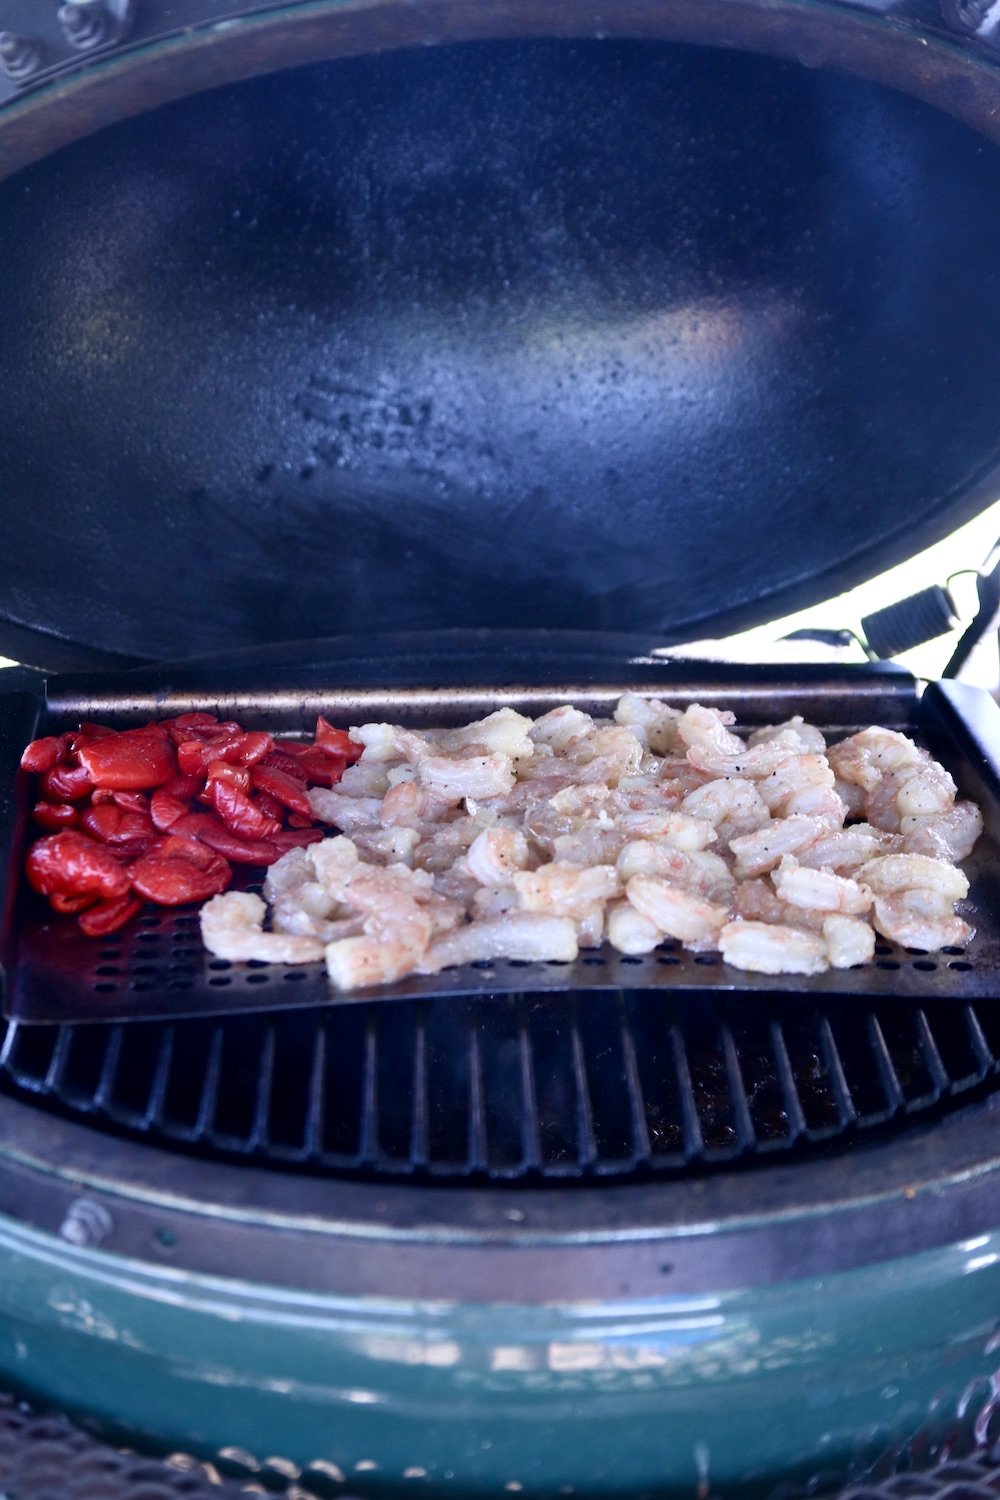 big green egg grill with a grill pan: red peppers and shrimp